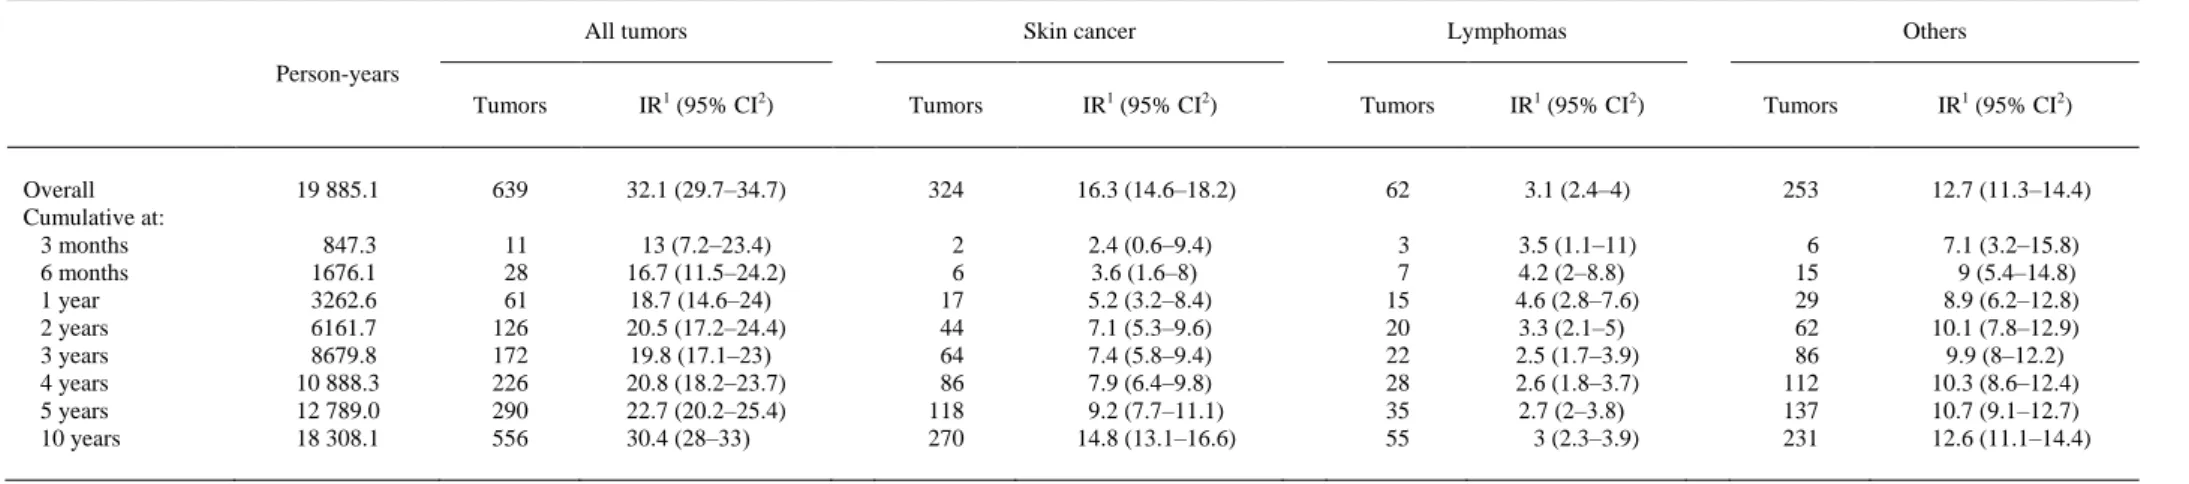 Table 2. Incidence of tumors 